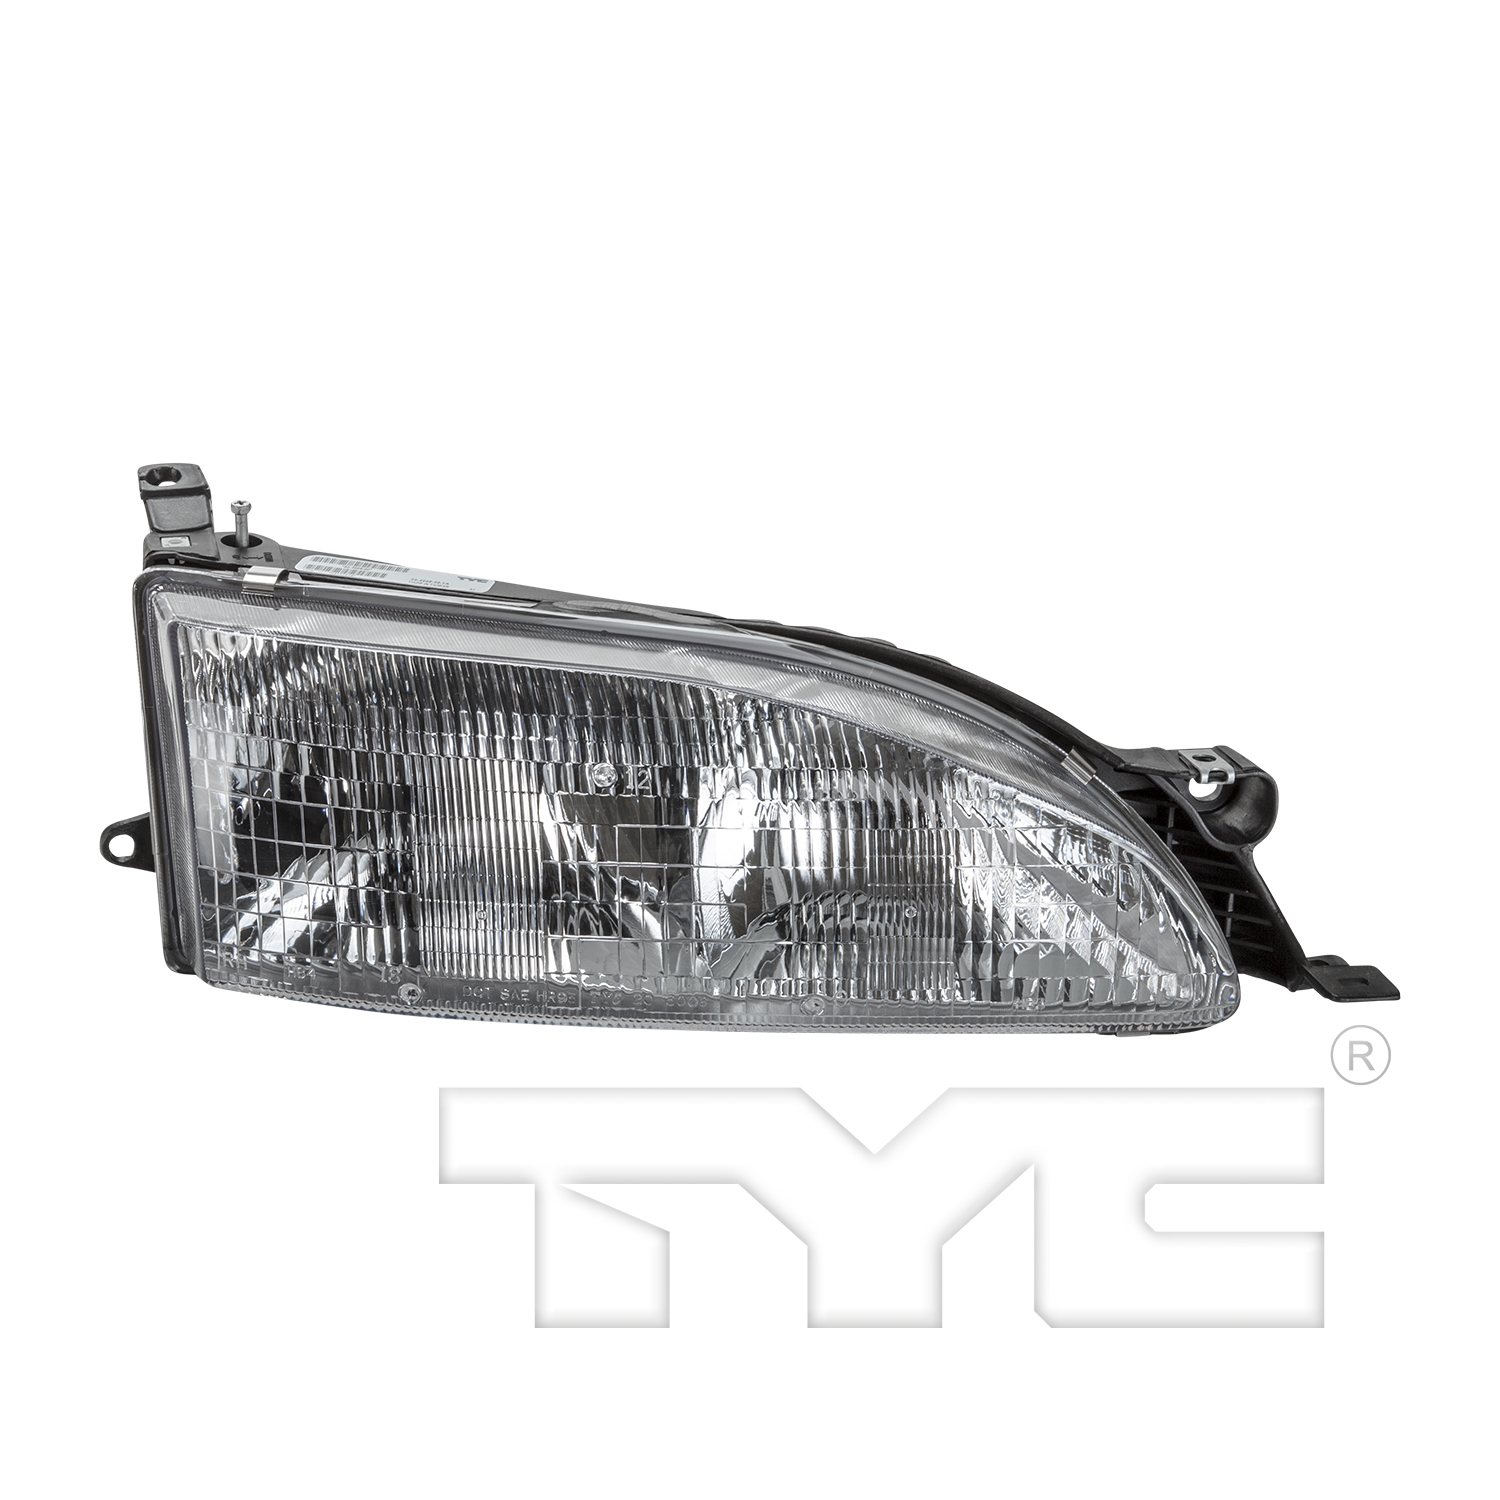 Aftermarket HEADLIGHTS for TOYOTA - CAMRY, CAMRY,95-96,RT Headlamp assy composite